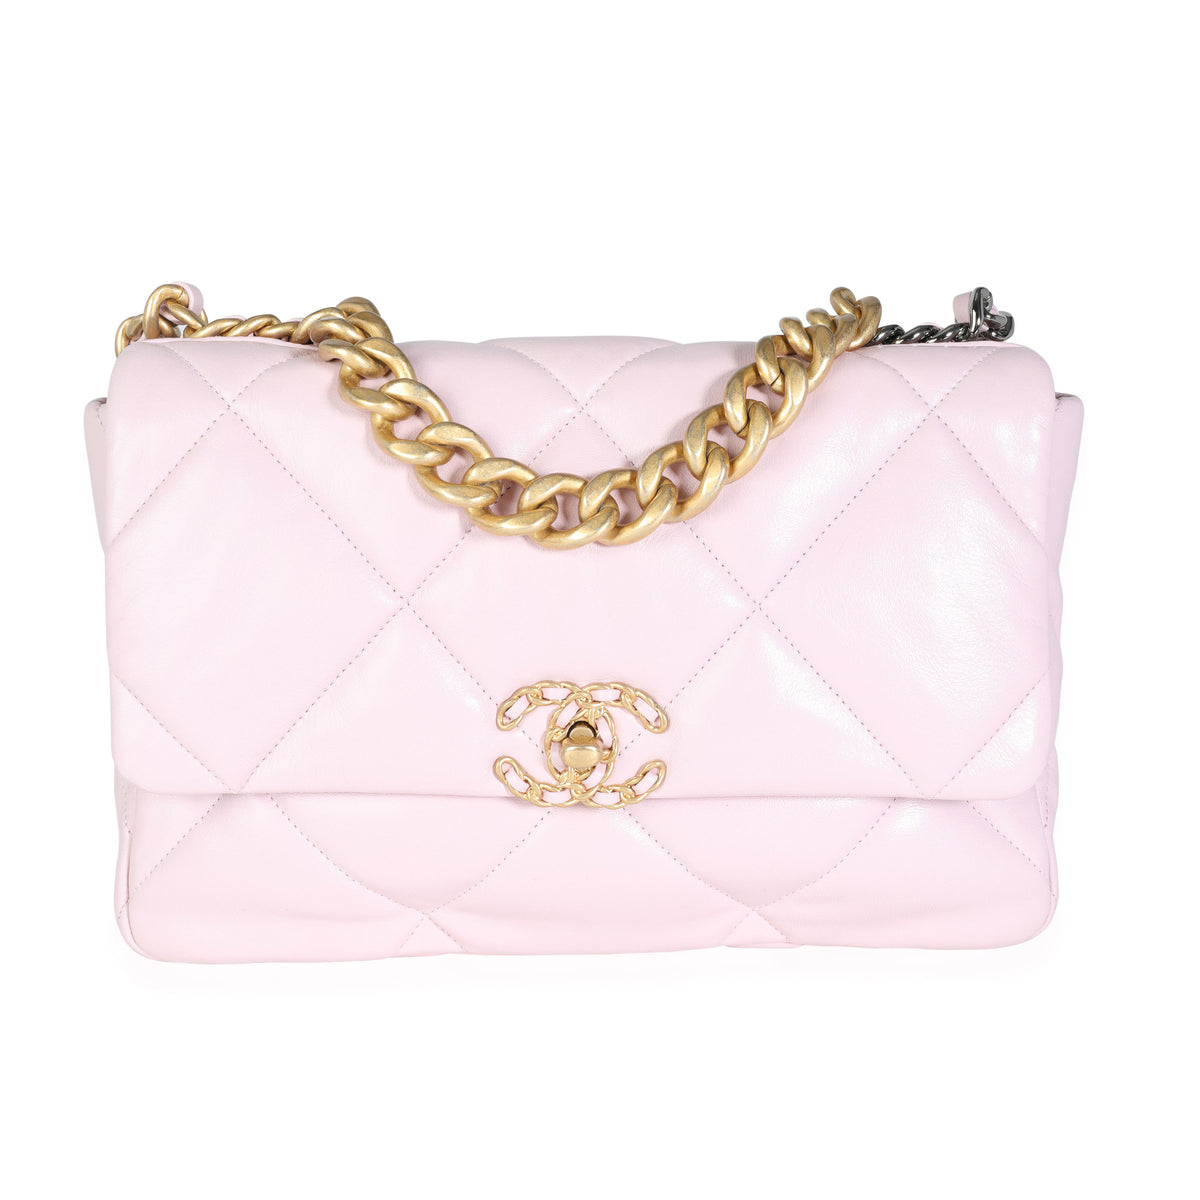 Chanel Light Pink Quilted Lambskin Large Chanel 19 Bag